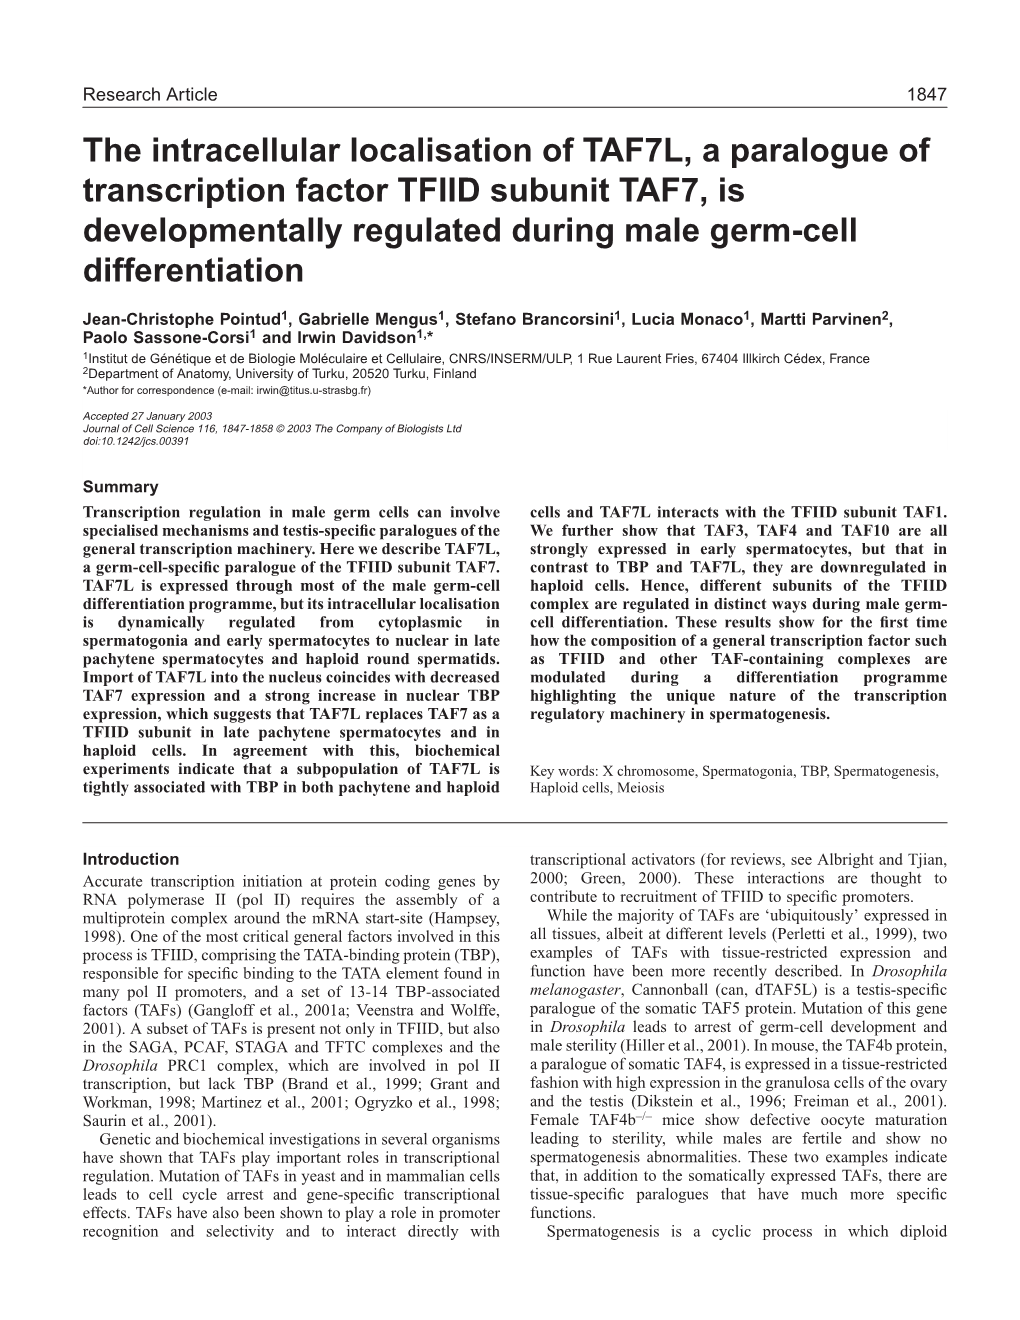 The Intracellular Localisation of TAF7L, a Paralogue of Transcription Factor TFIID Subunit TAF7, Is Developmentally Regulated During Male Germ-Cell Differentiation